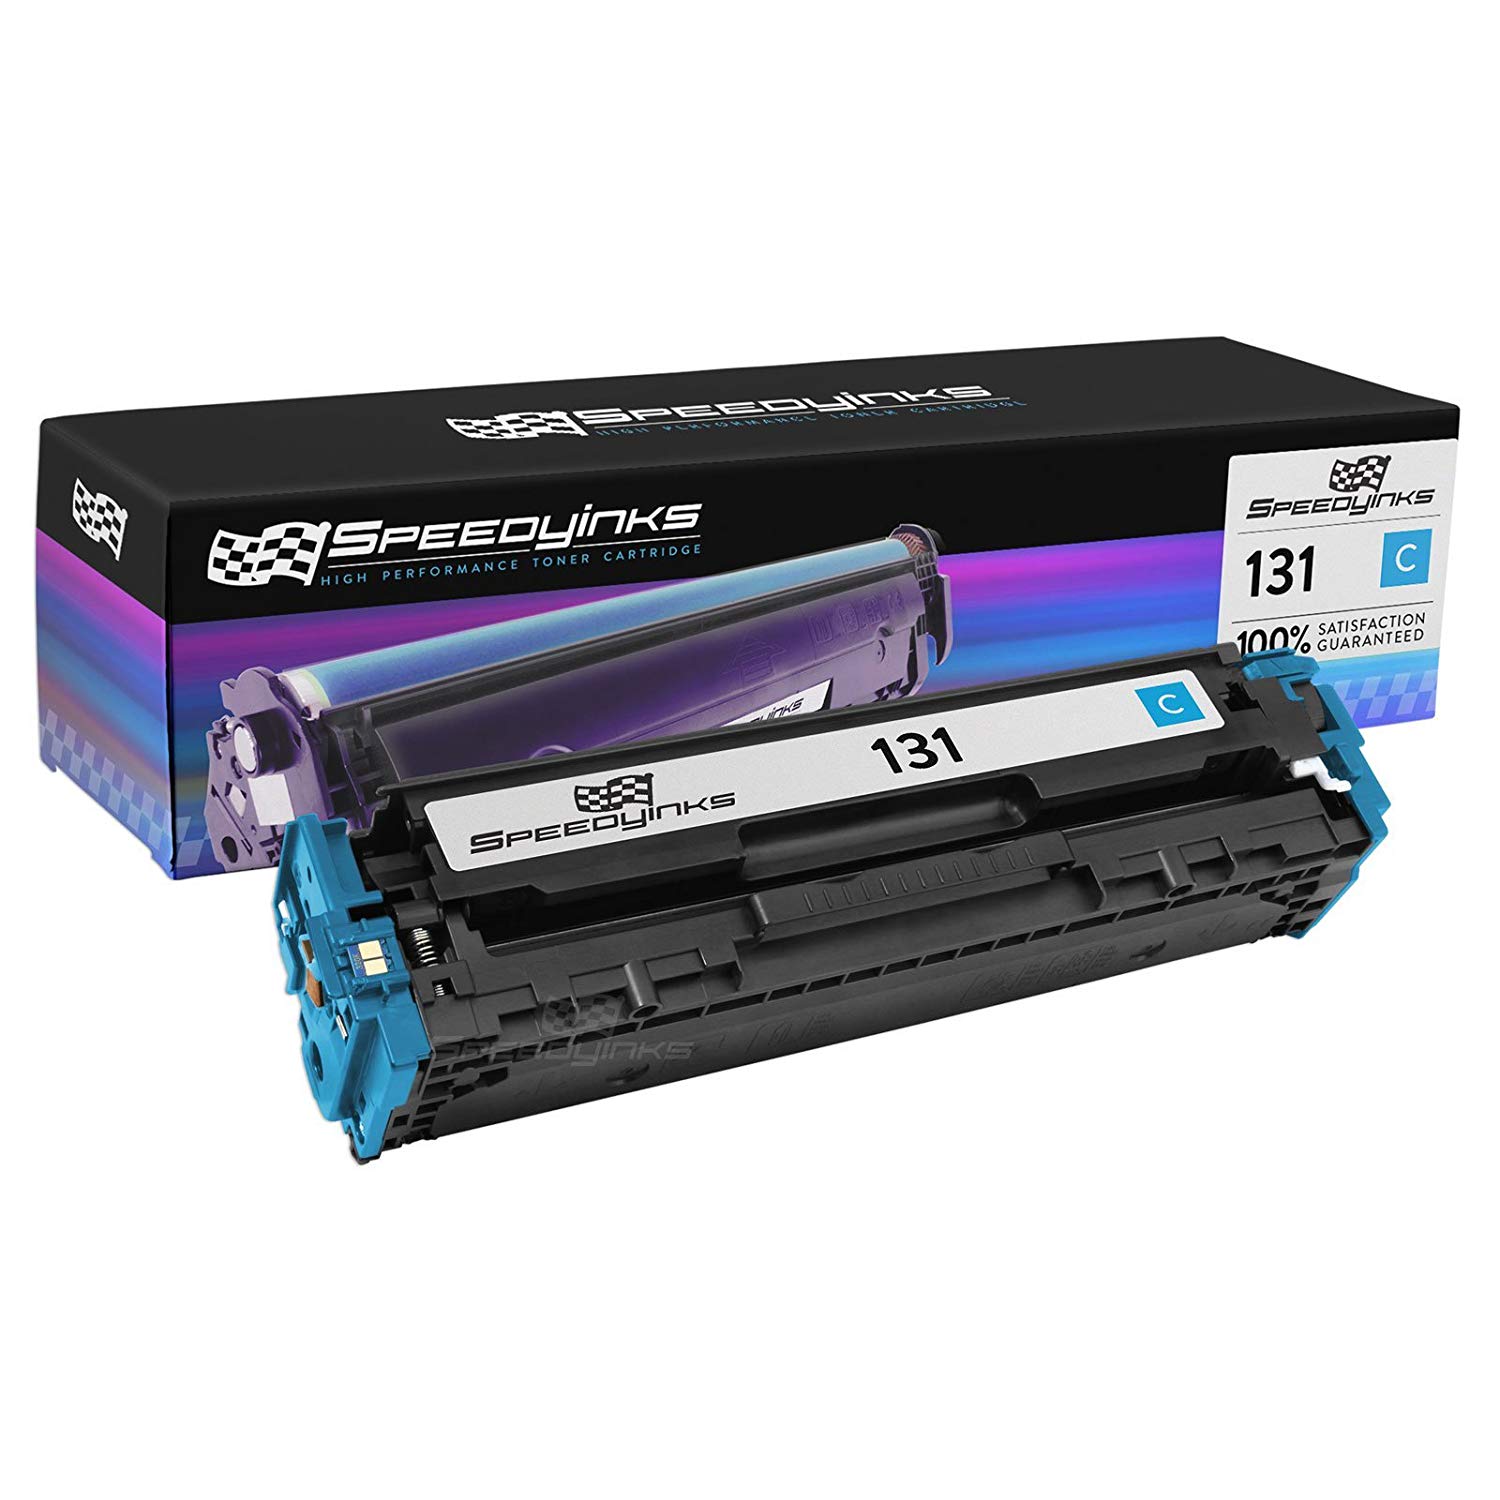 SpeedyInks - Compatible Canon 131 Cyan Laser Toner Cartridge / 6271B001AA for for use in Canon Color ImageCLASS MF8280Cw, Canon Color imageCLASS LBP7110Cw - image 1 of 3